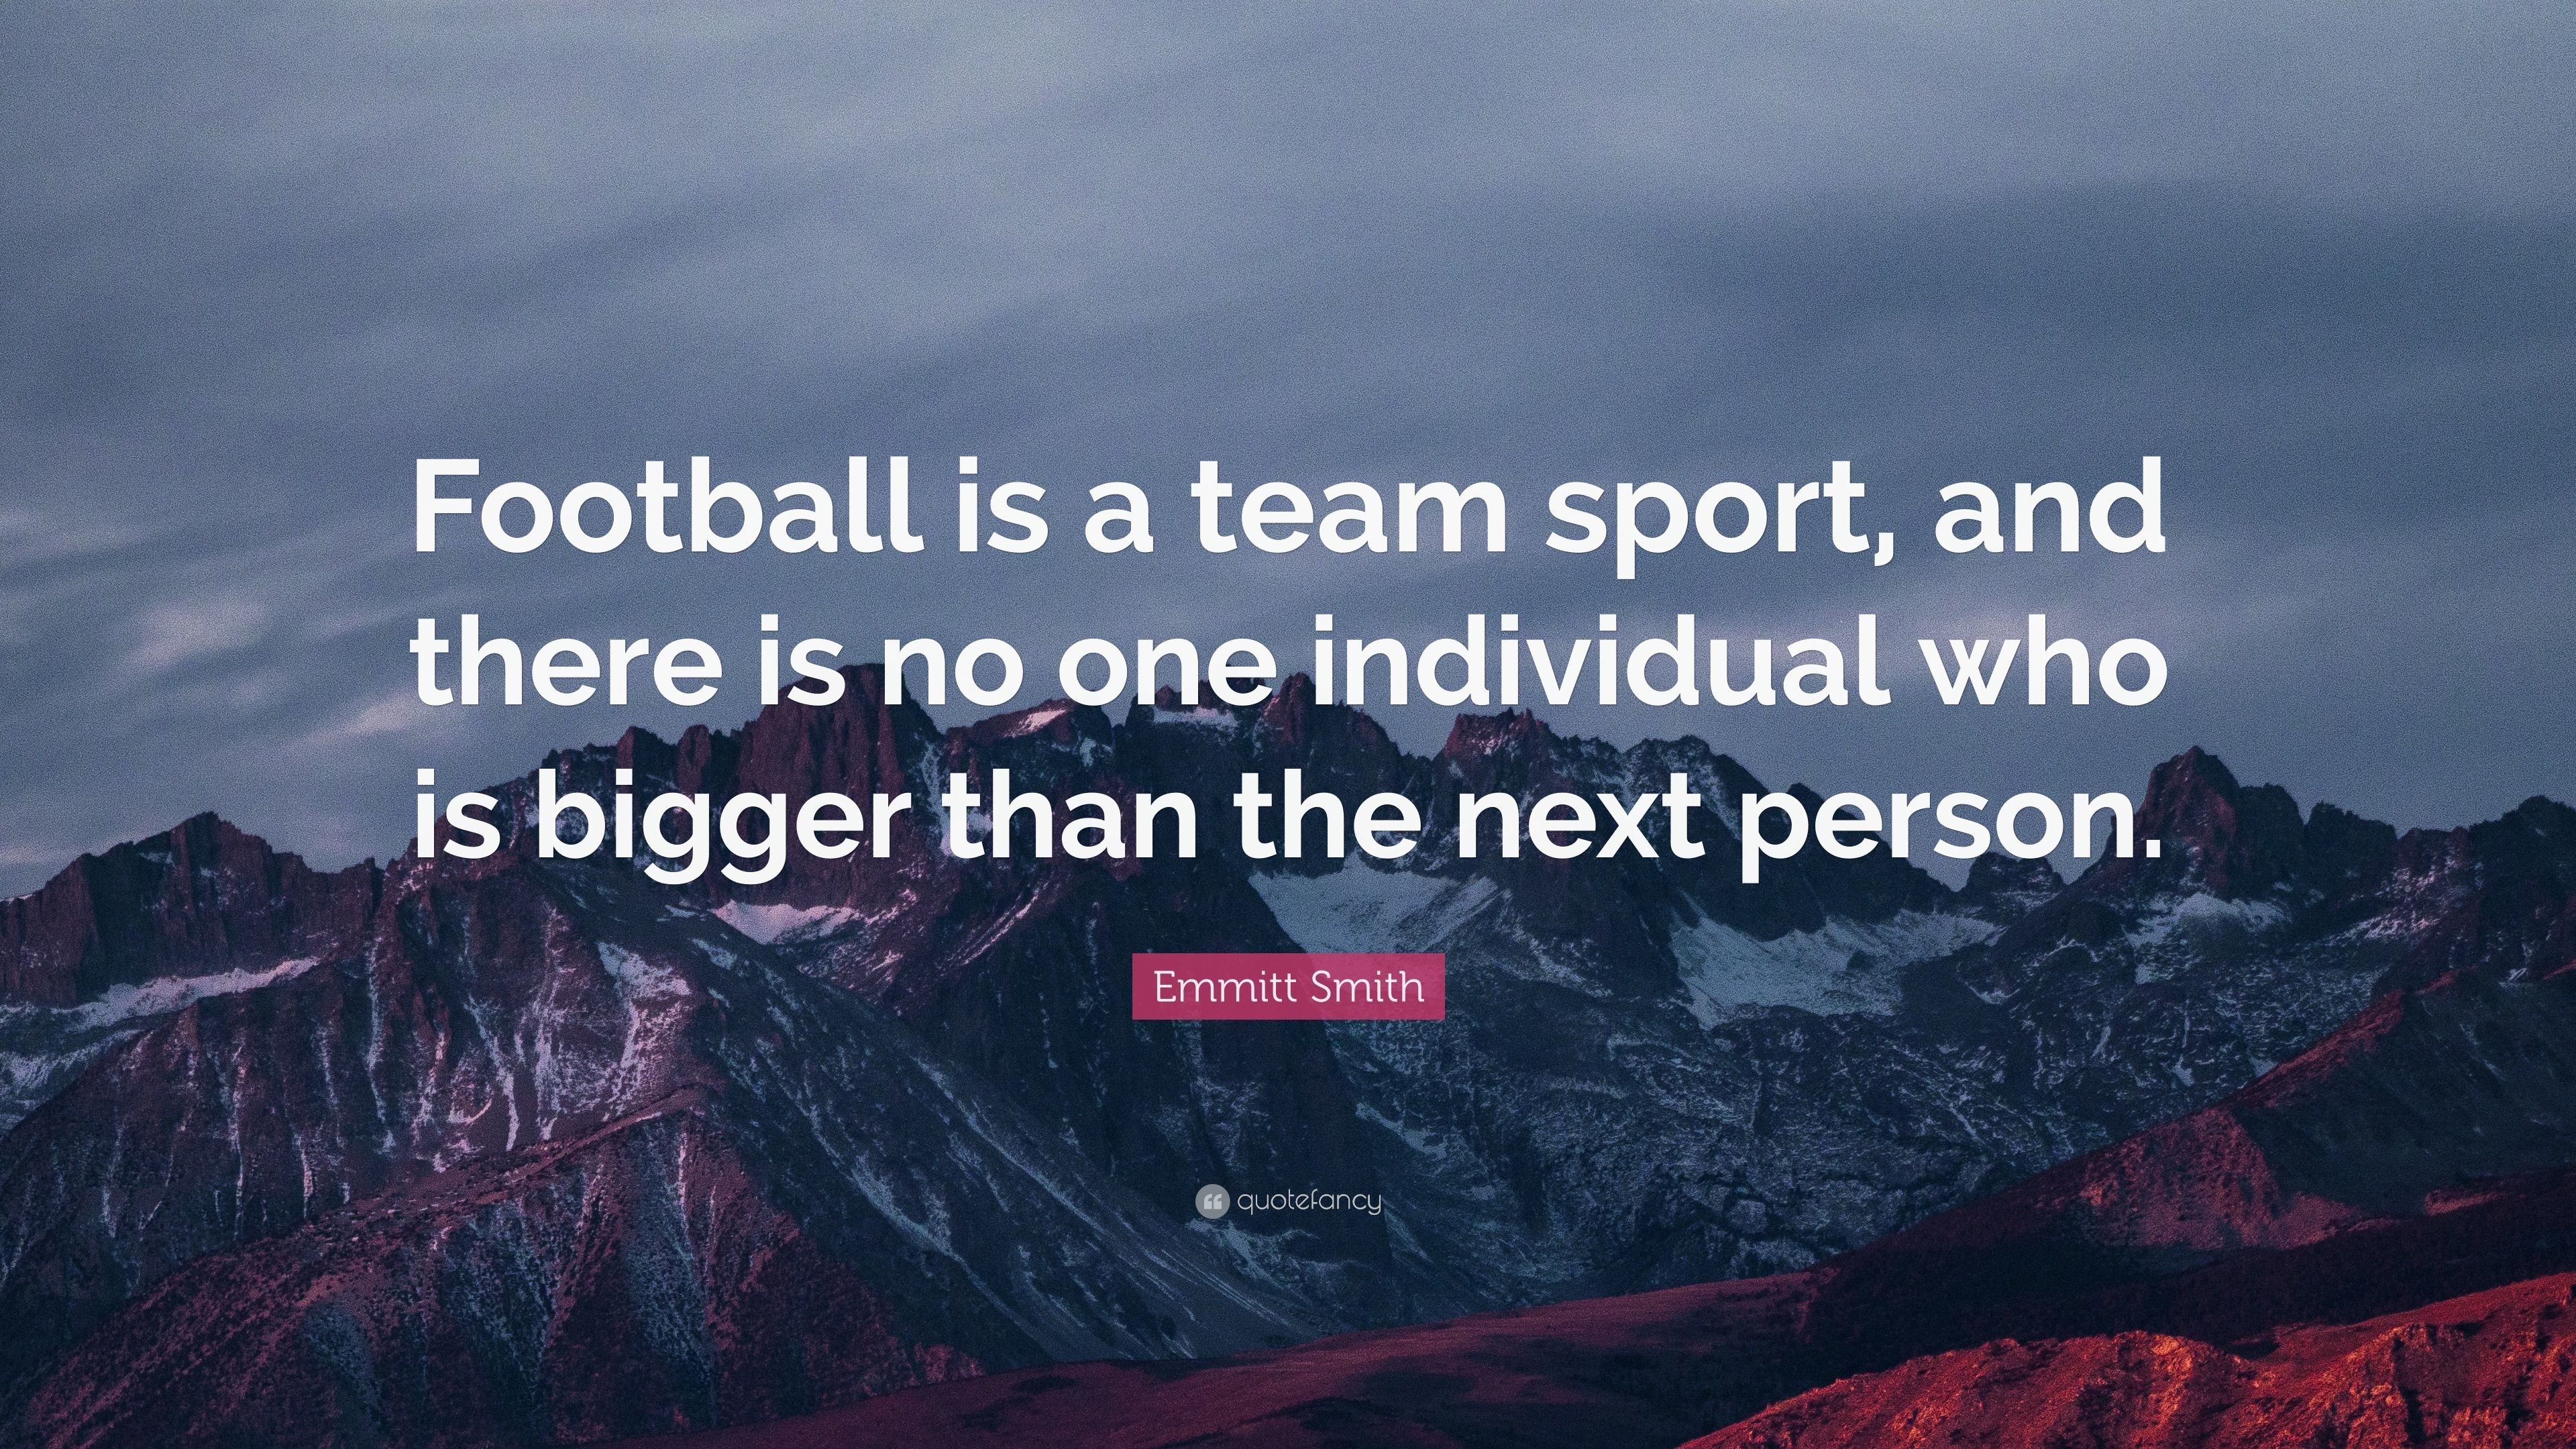 3840x2160 Emmitt Smith Quote: “Football is a team sport, and there is no one